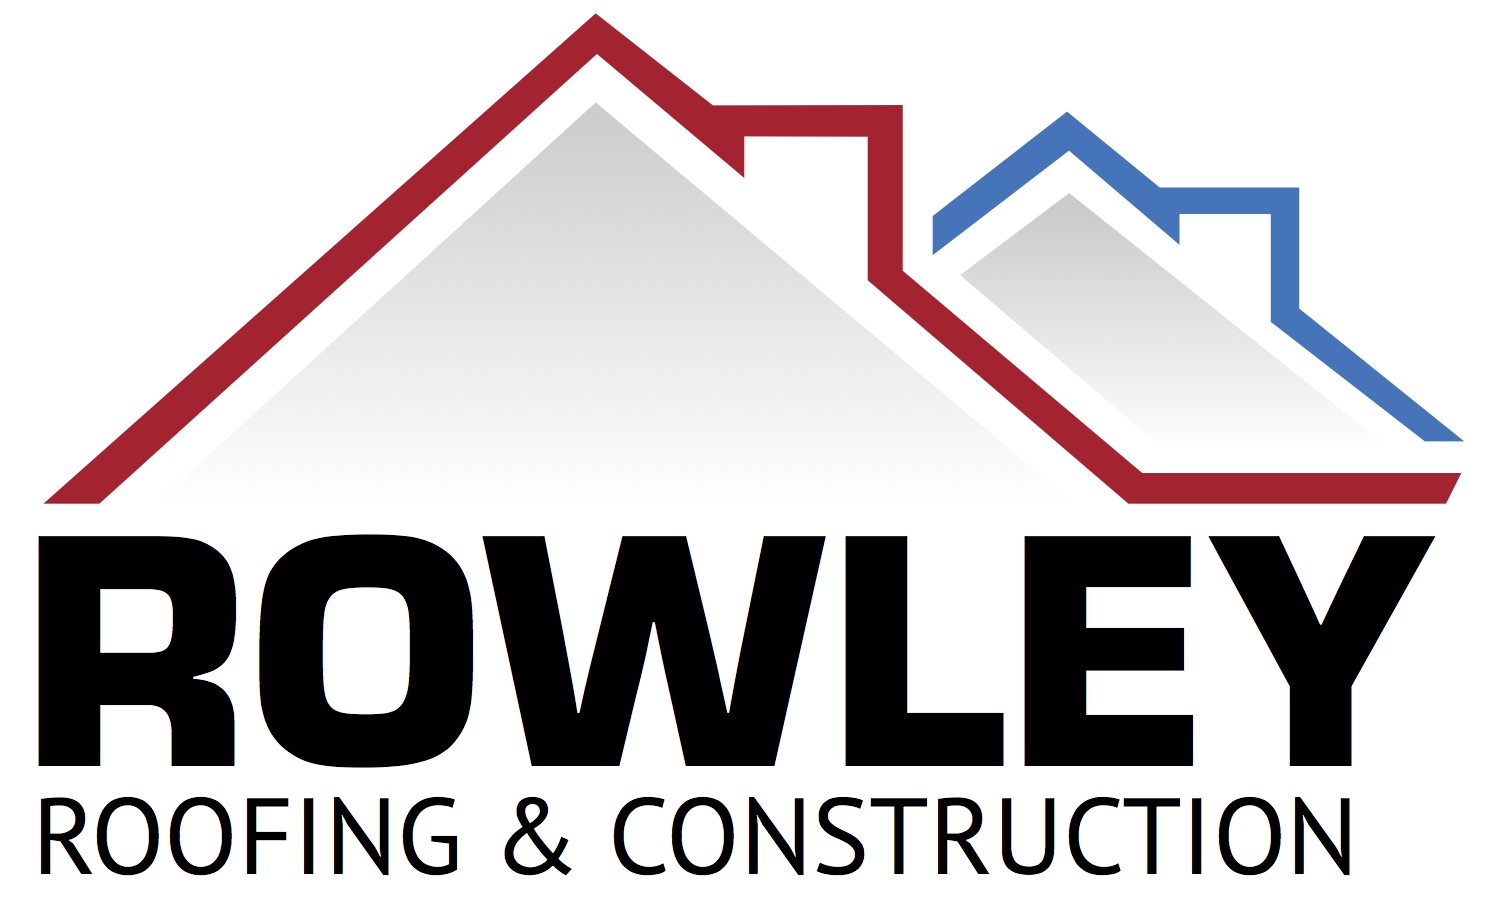 Rowley Roofing & Construction, Inc.